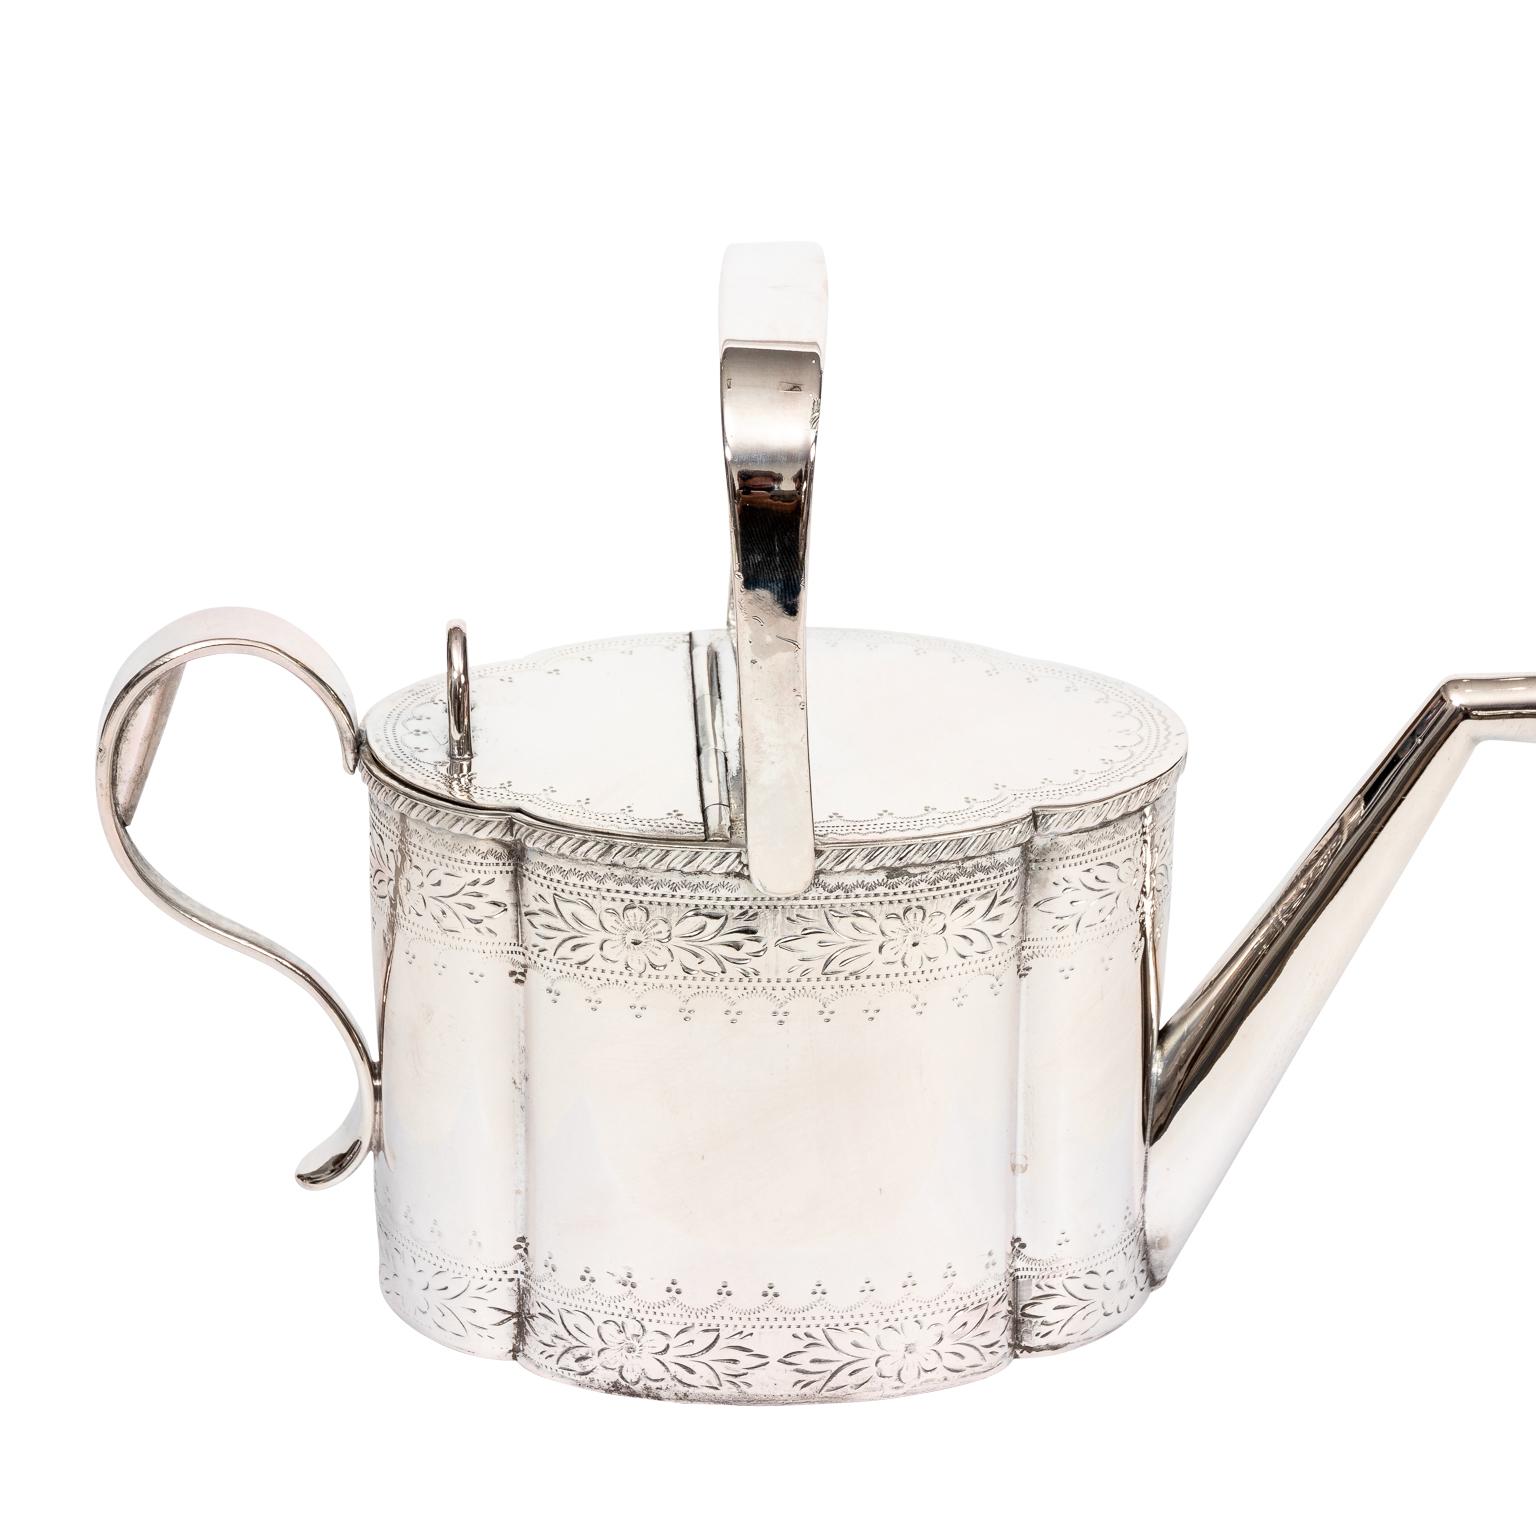 Edwardian style silver plate watering can with floral border trim, circa 1900s. Please note of wear consistent with age. Made in England.